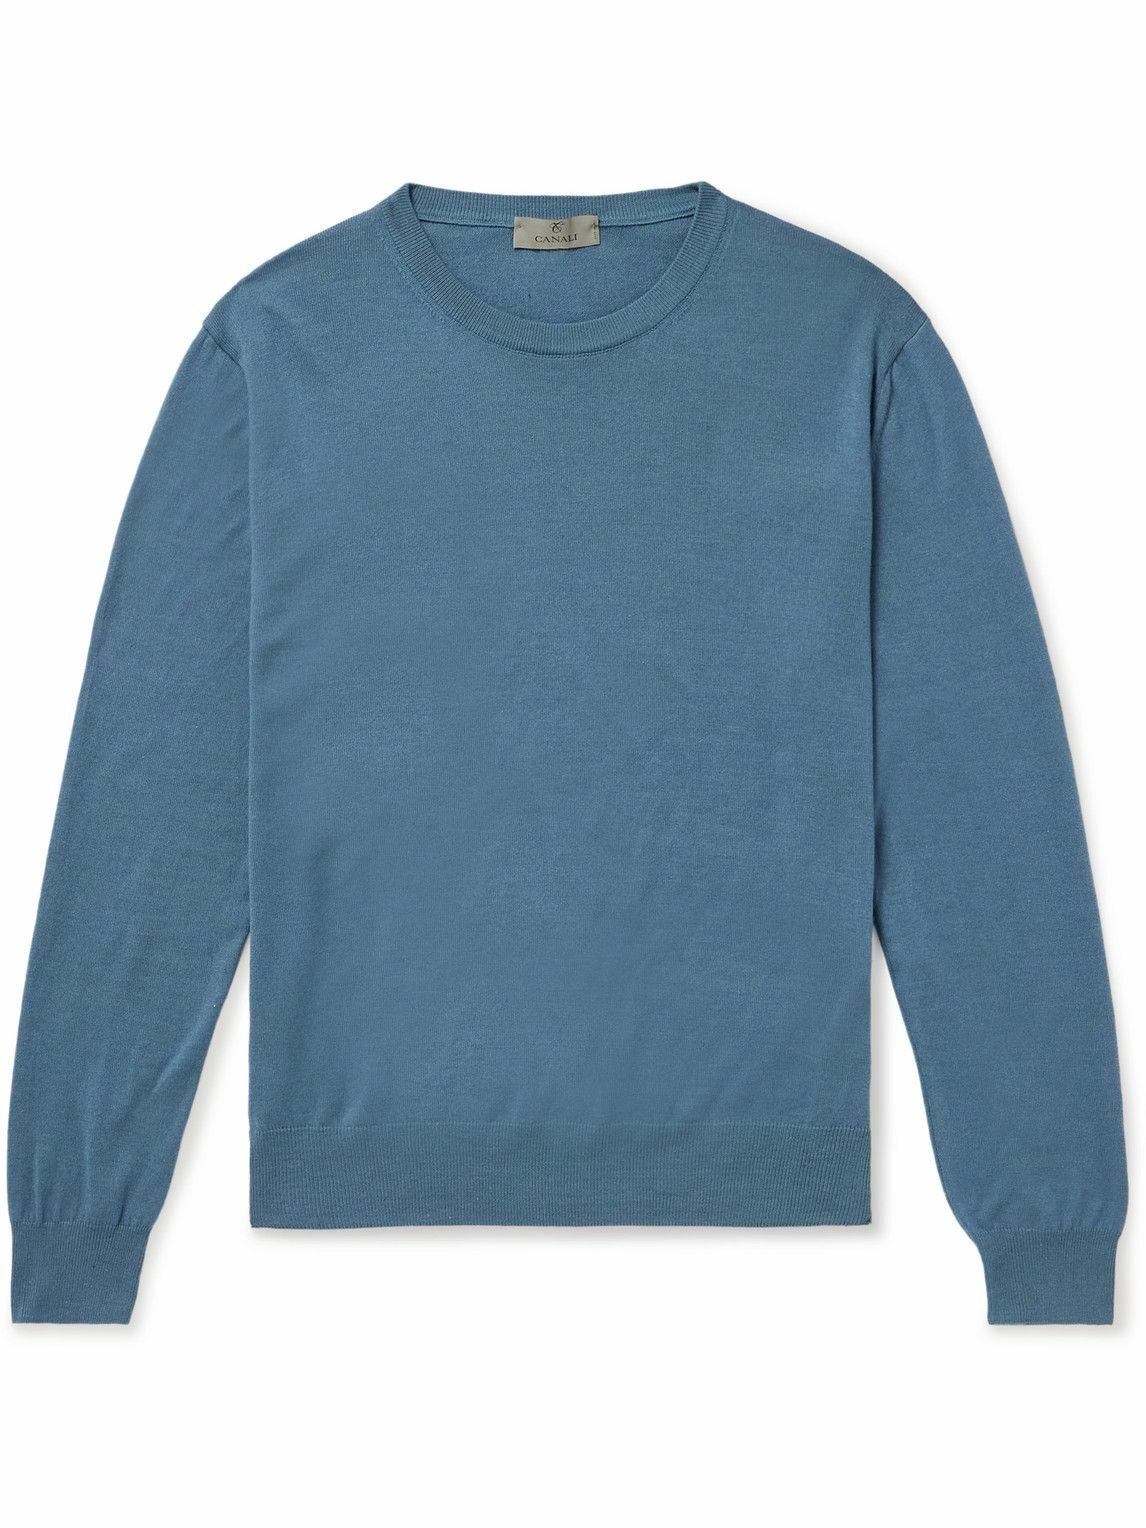 Canali - Cotton and Silk-Blend Sweater - Blue Canali